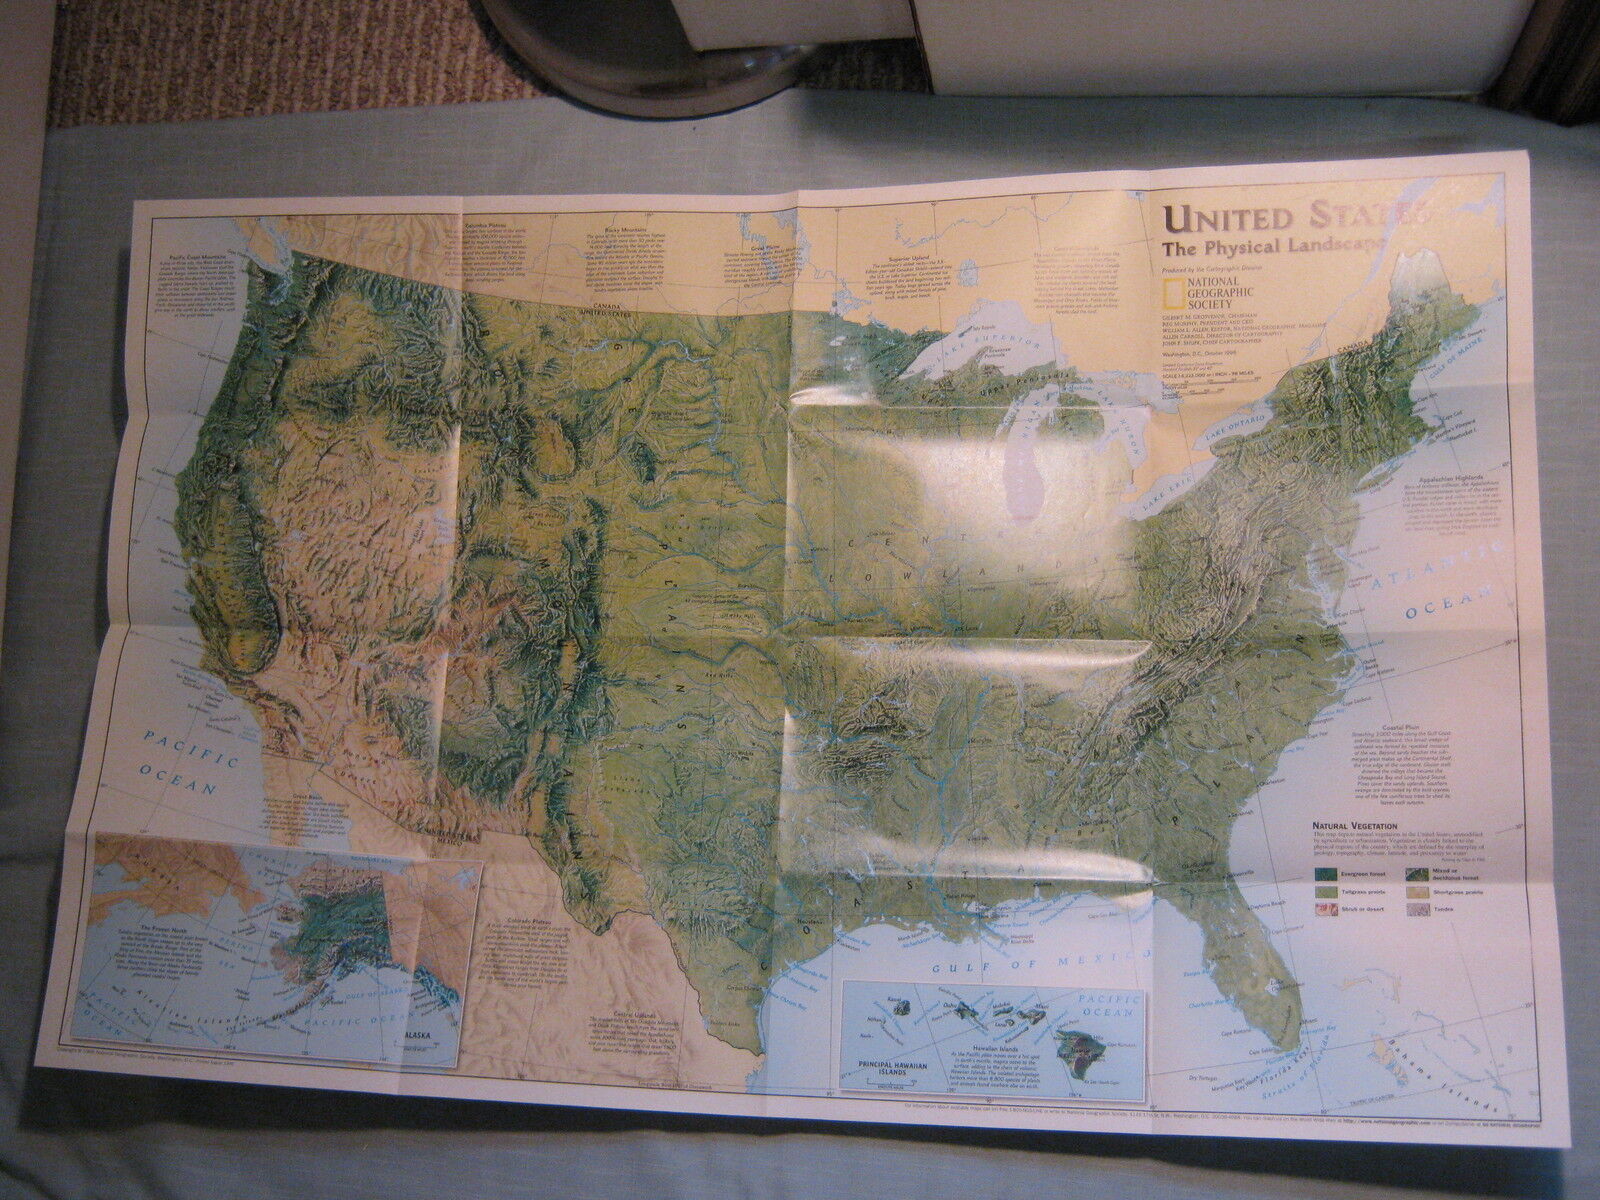 PHYSICAL MAP OF UNITED STATES + FEDERAL LANDS National Geographic October 1996